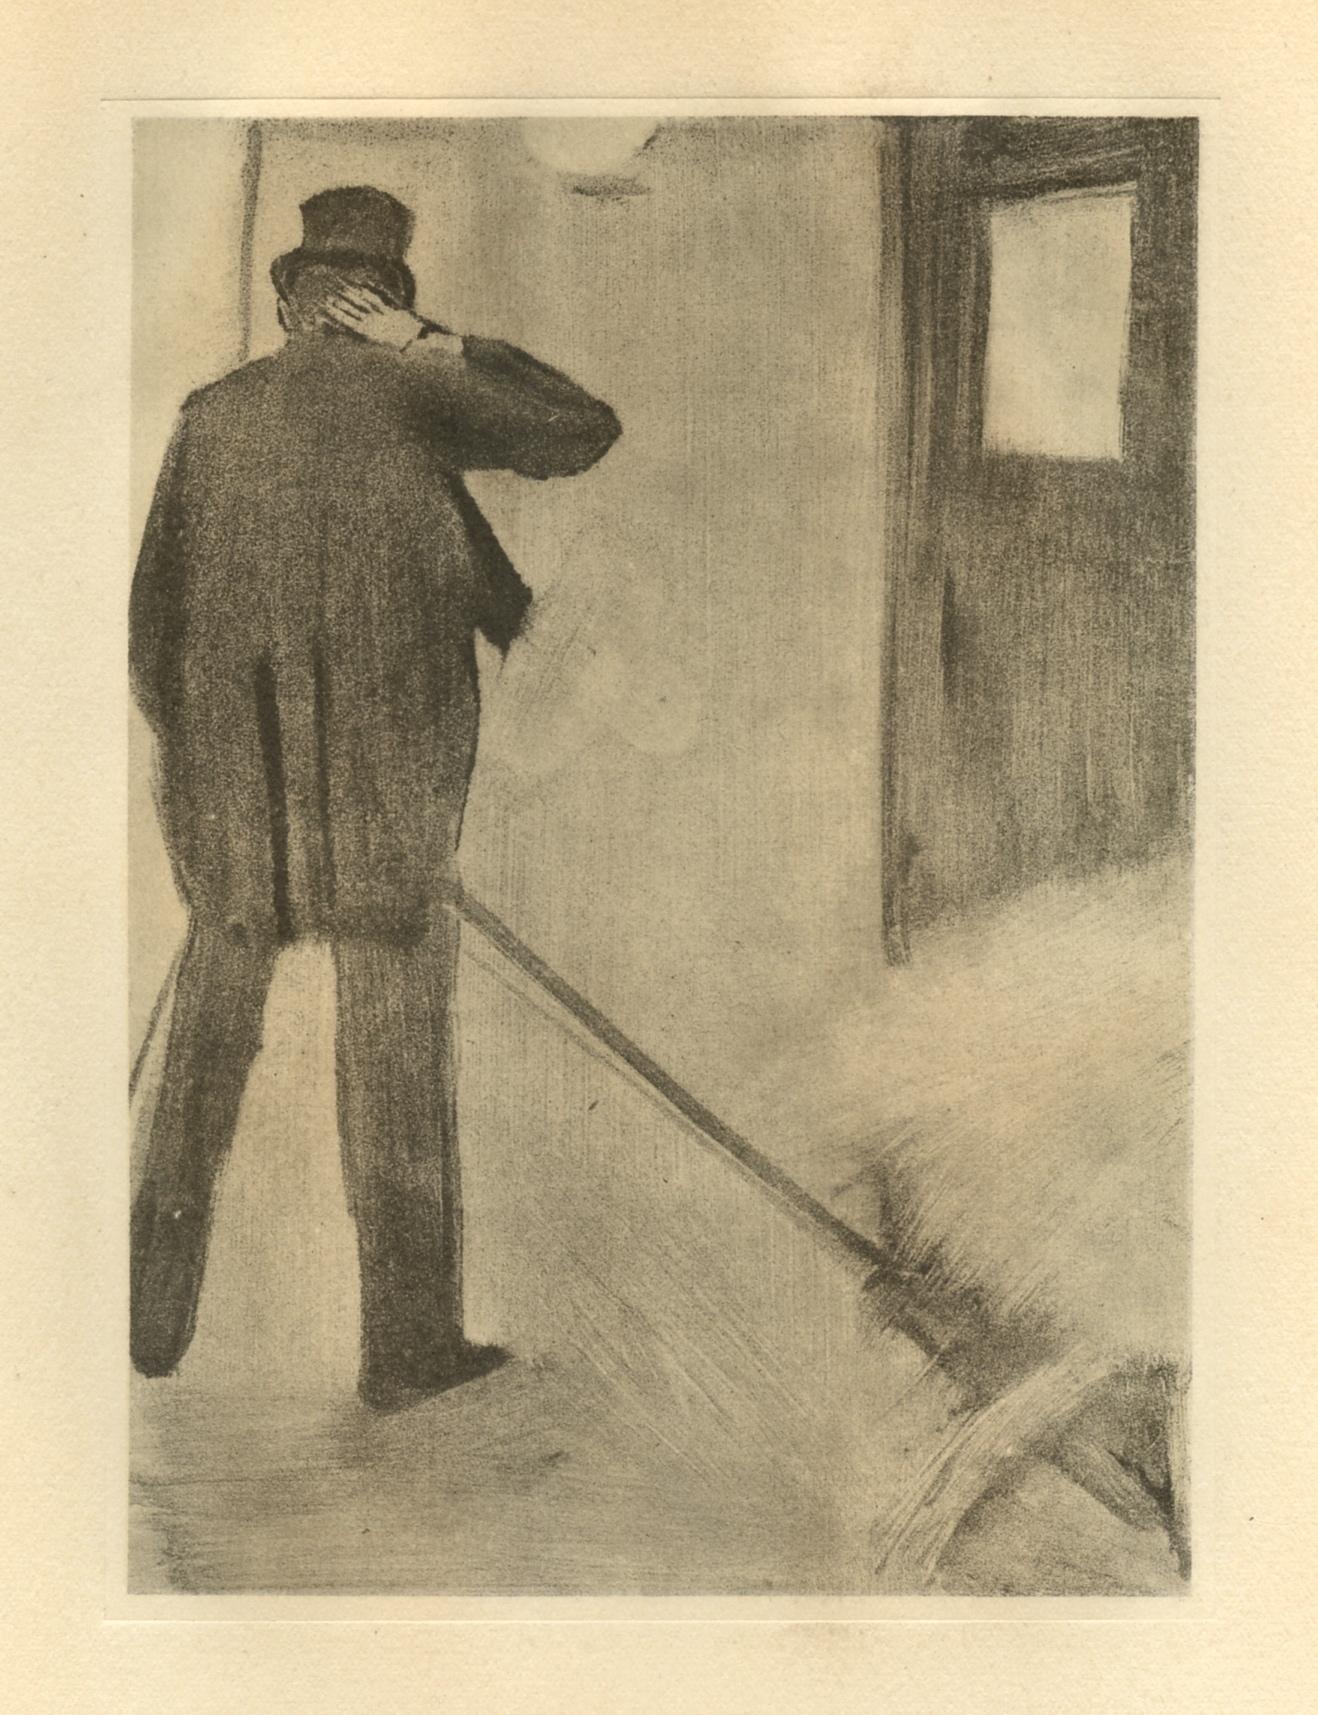 Engraving on Marais vélin paper. Unsigned and unnumbered, as issued. Good Condition; never framed or matted. Notes: From the volume, E. Degas Les Monotypes, 1948. Published by Quatre Chemins-Editart, Paris; printed by Les Ateliers G. Bouan, and